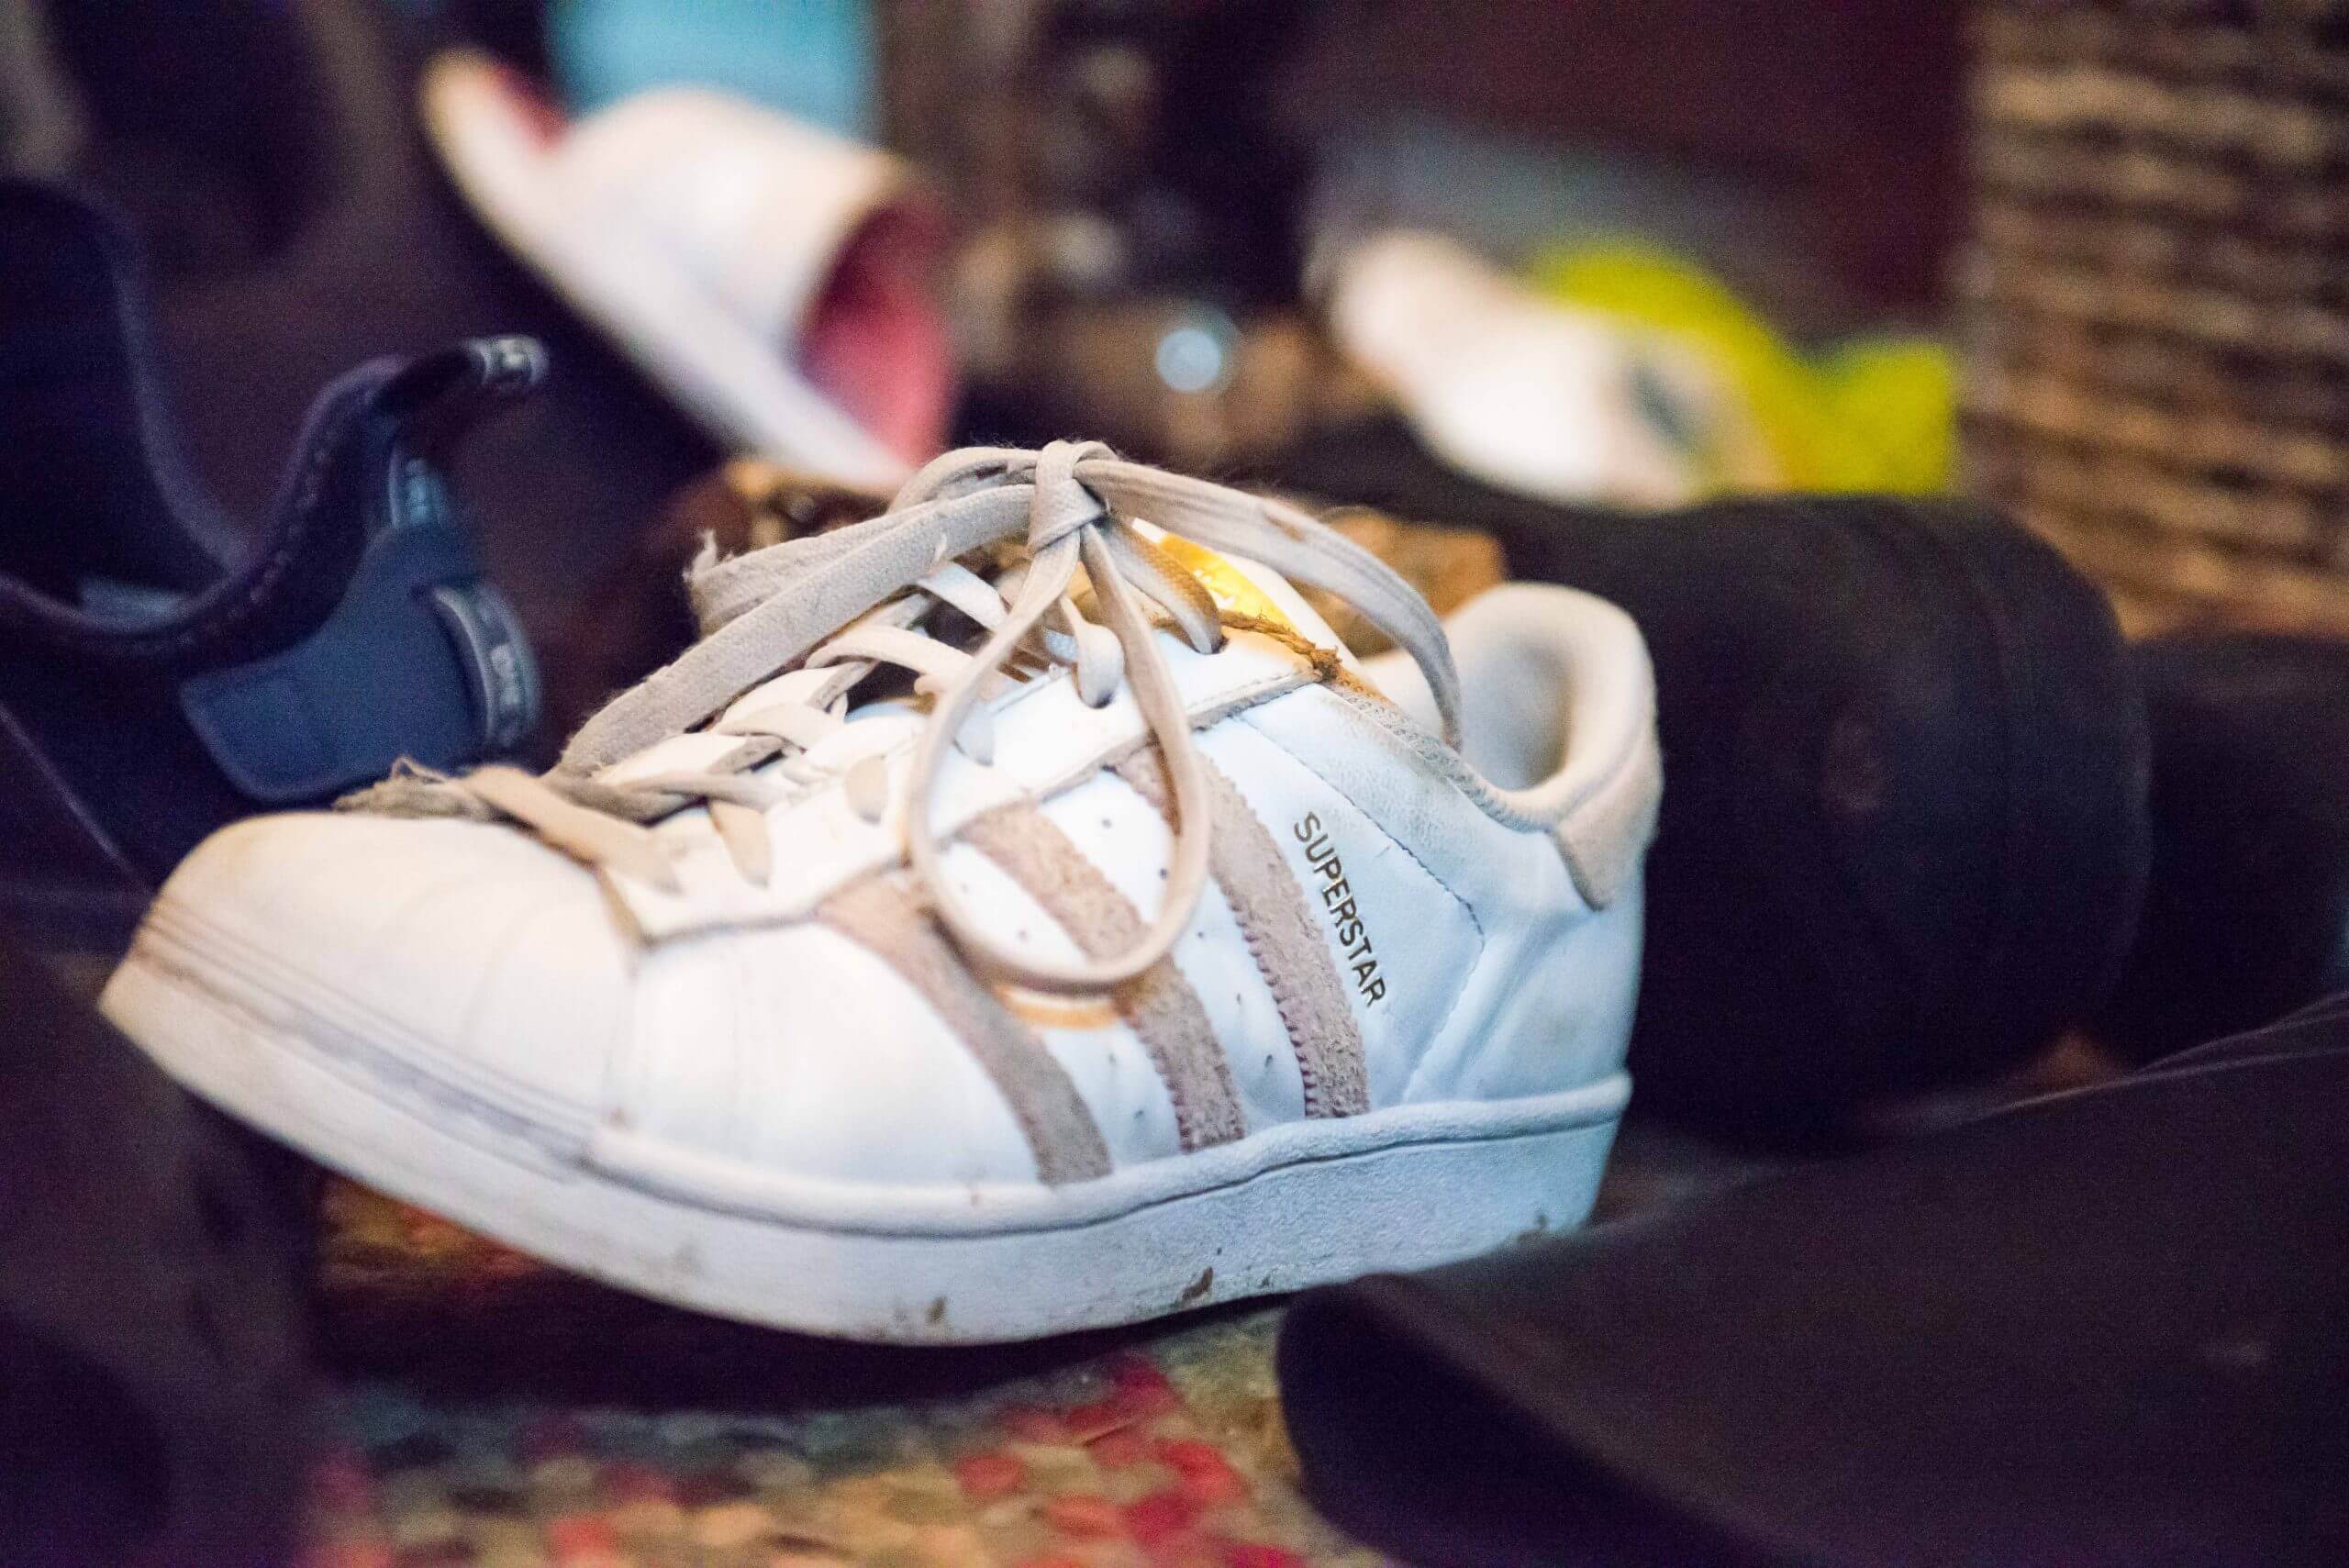 A focused view of a tennis shoe in front of an unfocused view of other shoes.